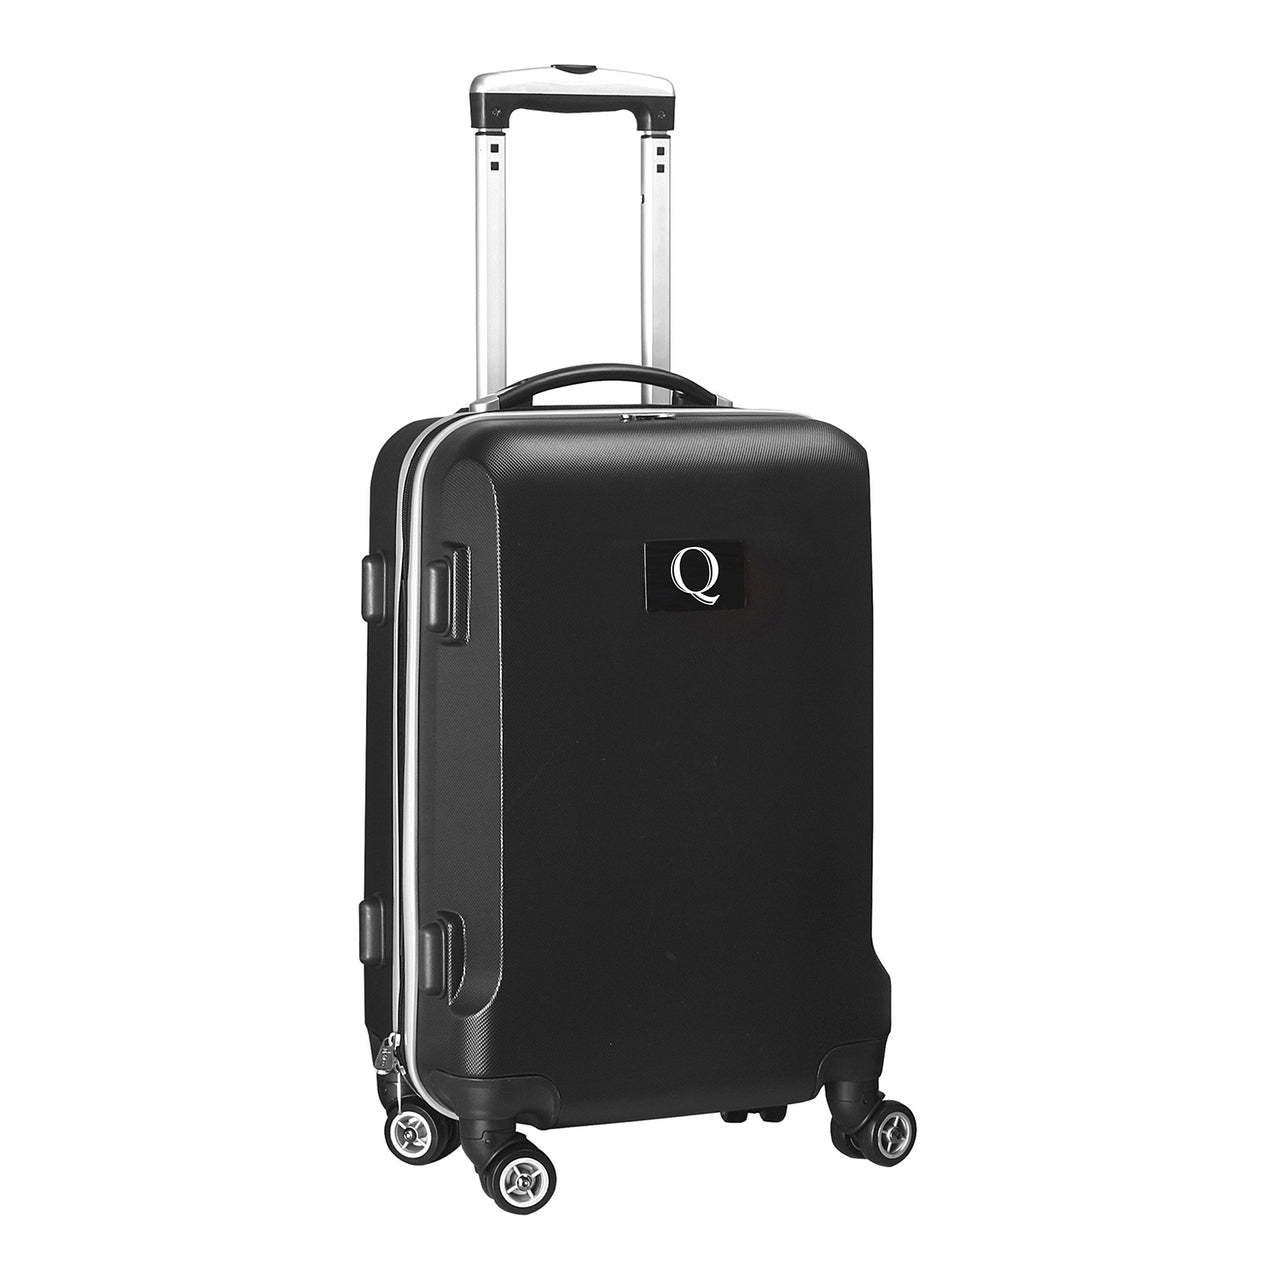 Personalized Initial Name letter "Q" 20 inches Carry on Hardcase Spinner Luggage by Mojo in BLACK